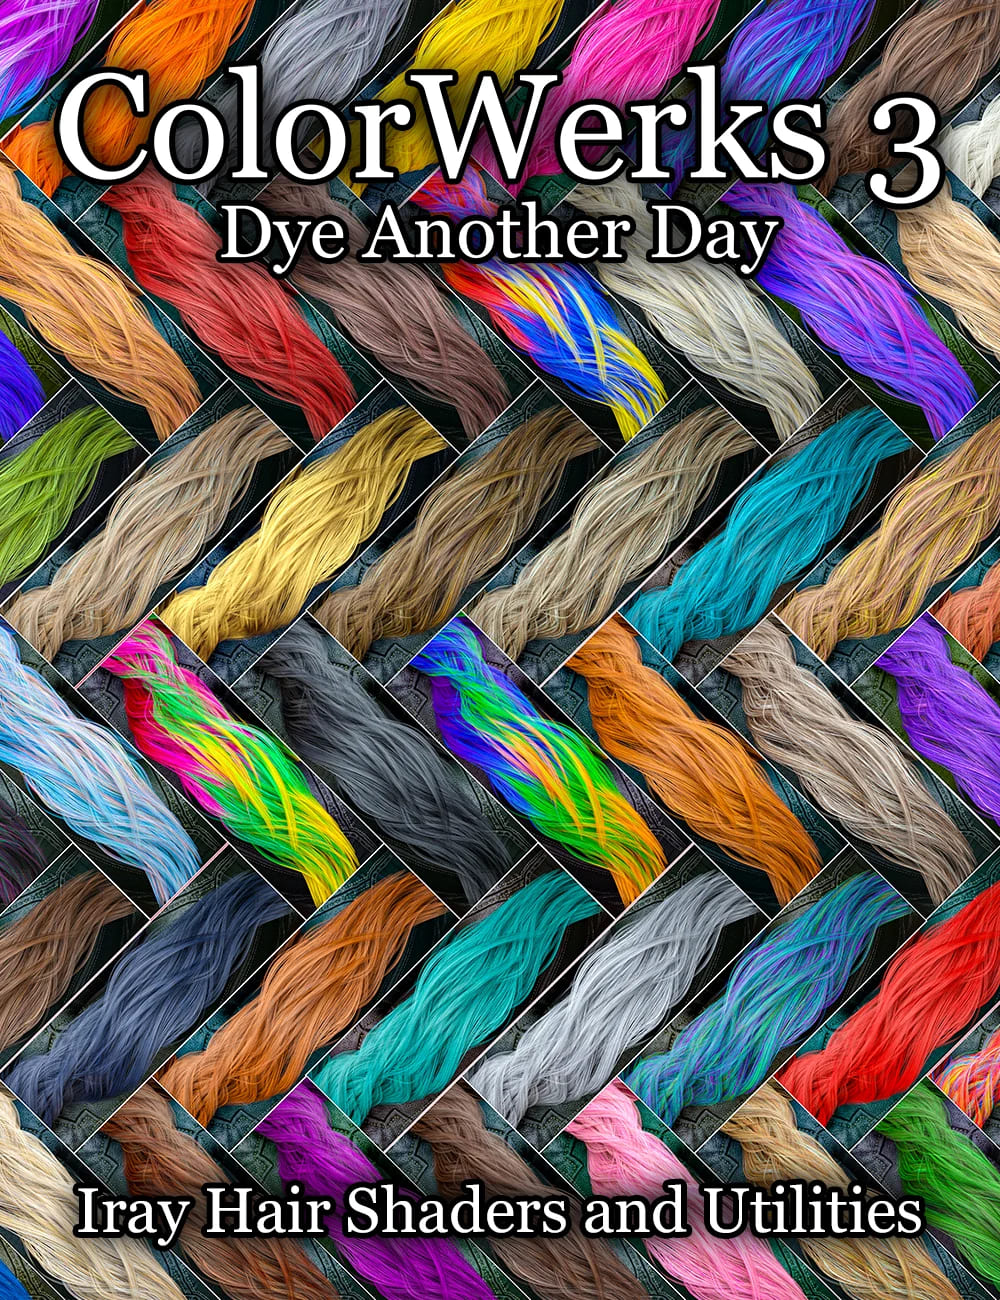 ColorWerks 3 Dye Another Day Iray Hair Shaders_DAZ3D下载站